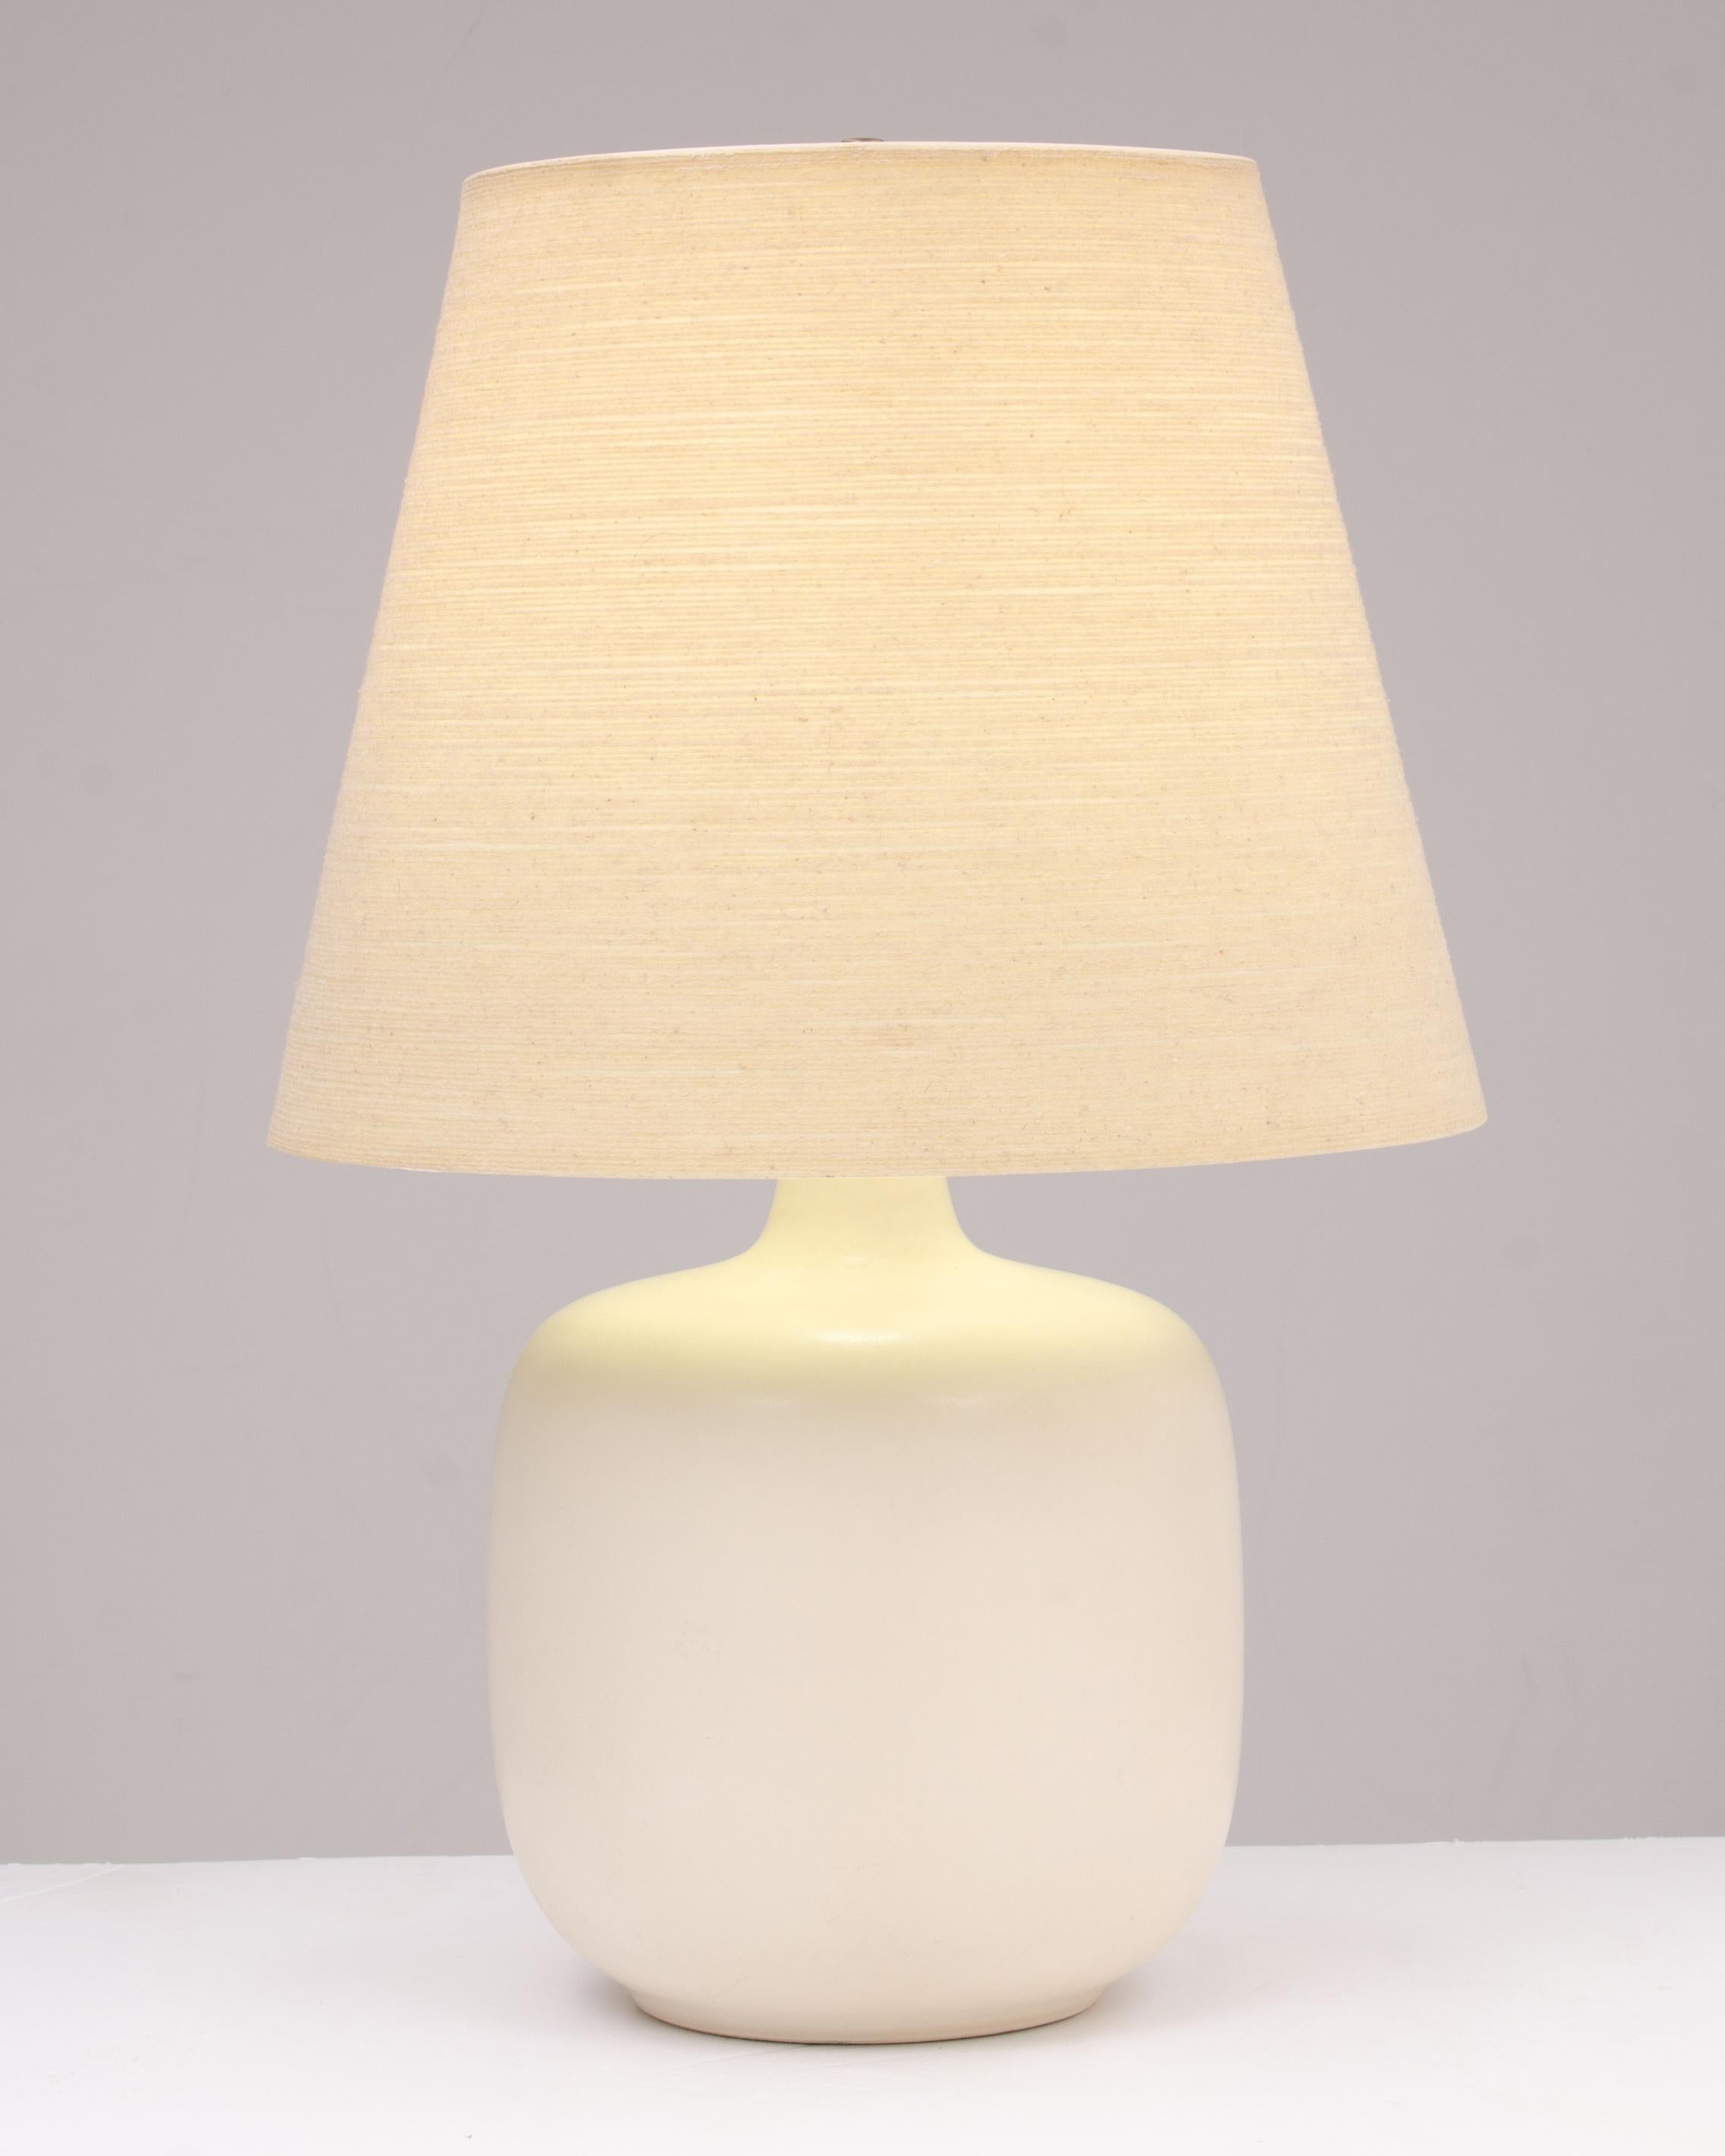 Late 20th Century Large Lotte & Gunnar Bostlund Table Lamp Original Shade Unmarked Bone Stoneware For Sale